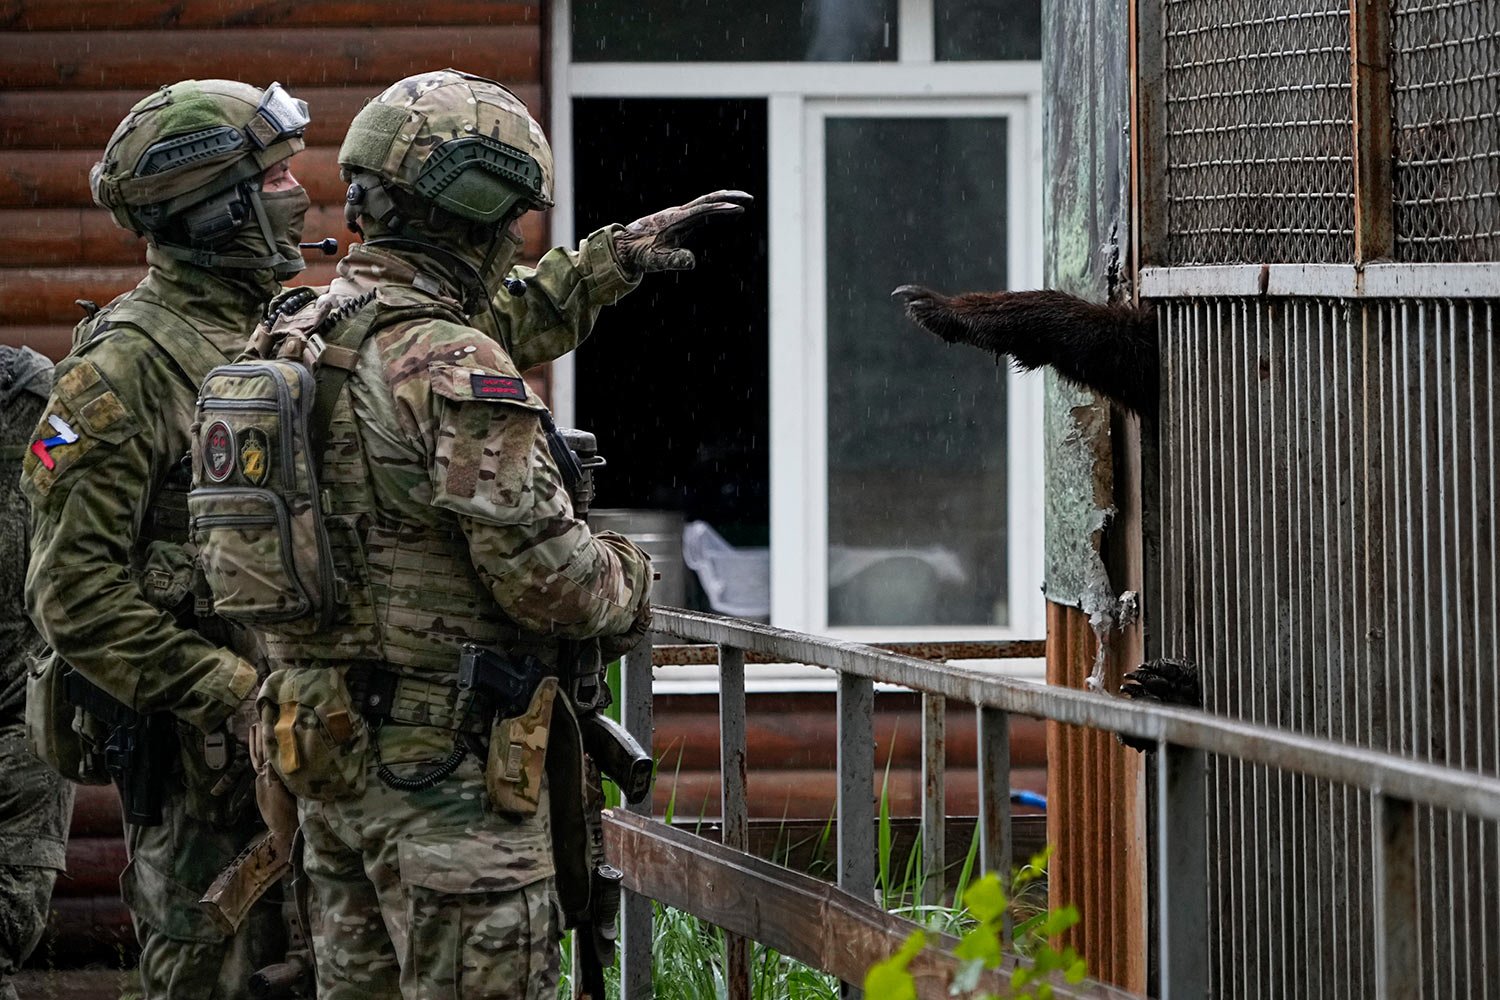  Russian soldiers play with a bear at the zoo in Mariupol, in territory under the government of the Donetsk People's Republic, eastern Ukraine, Wednesday, May 18, 2022. This photo was taken during a trip organized by the Russian Ministry of Defense. 